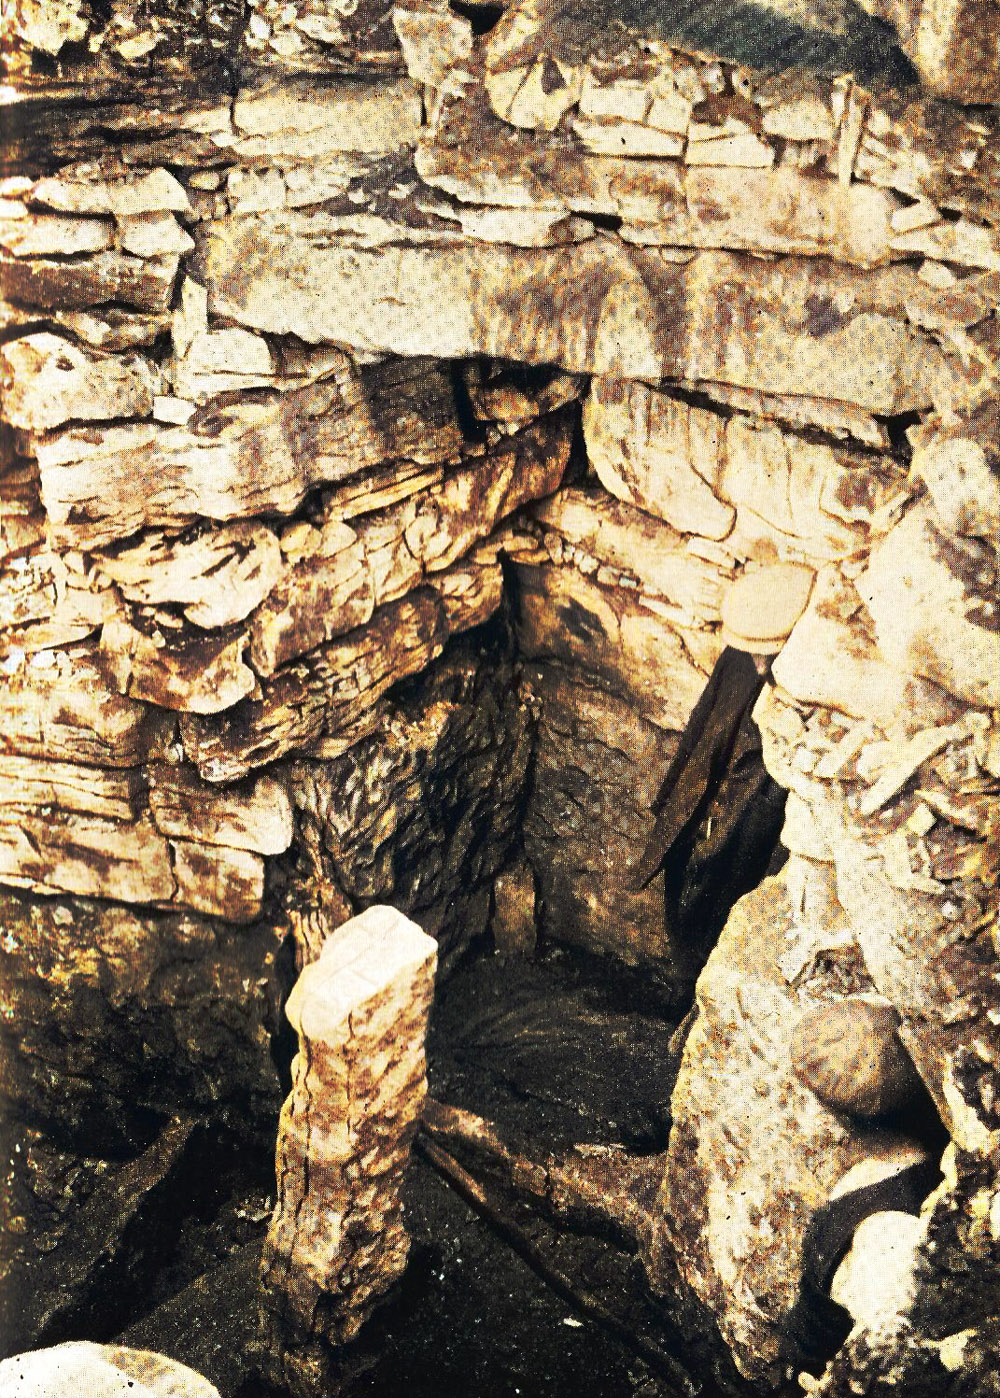 Chamber of Cairn F, cleared by Macalister in 1911